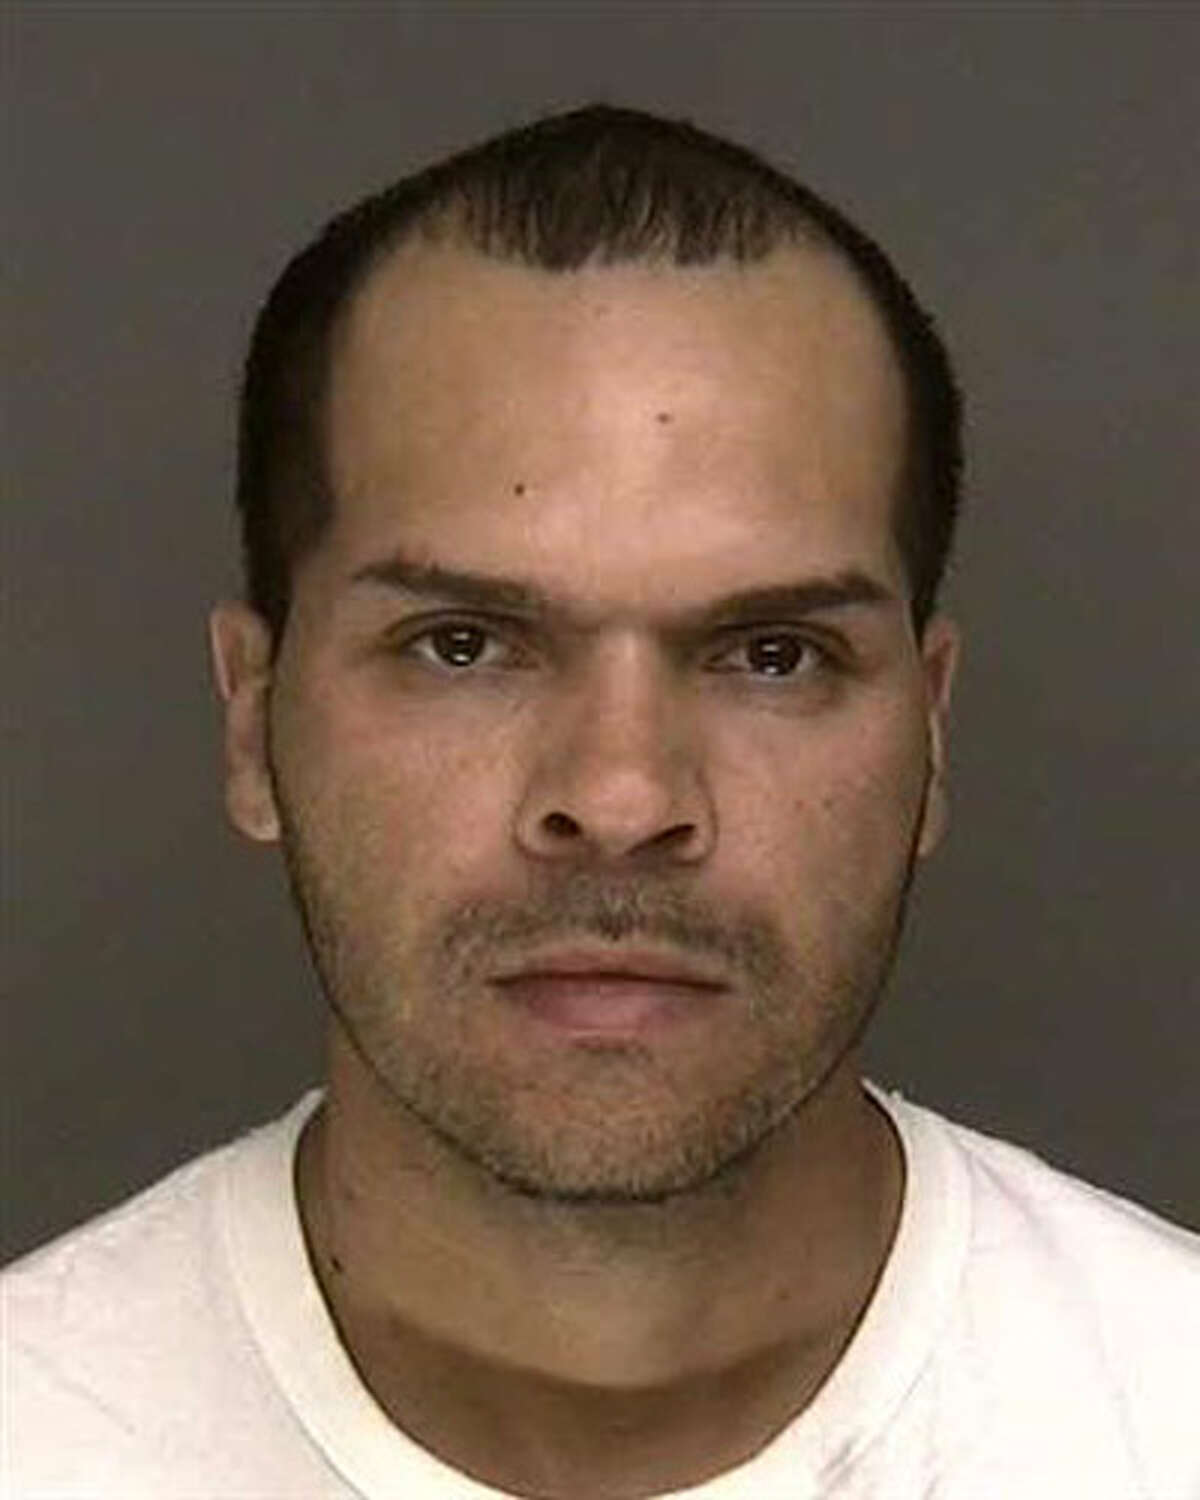 Santos Roman, 35, of Kossuth St. in Bridgeport, Conn., was charged with risk of injury to a minor, possession of narcotics, sale of narcotics and possession of narcotics within 1,500 feet of a school on Monday April 9, 2012.. He was being held in lieu of $100,000 bond pending arraignment Tuesday in Superior Court. According to Police Spokesman Keith Bryant, a kindergarten student at Barnum School, had come to school carrying Romanís jacket. When it came time to make his presentation in class, Bryant said the boy opened the jacket and showed off to his classmates 10 small plastic bags each containing five folds of heroin. He said the teacher quickly grabbed the bags away from the student and notified the principal who then called police.